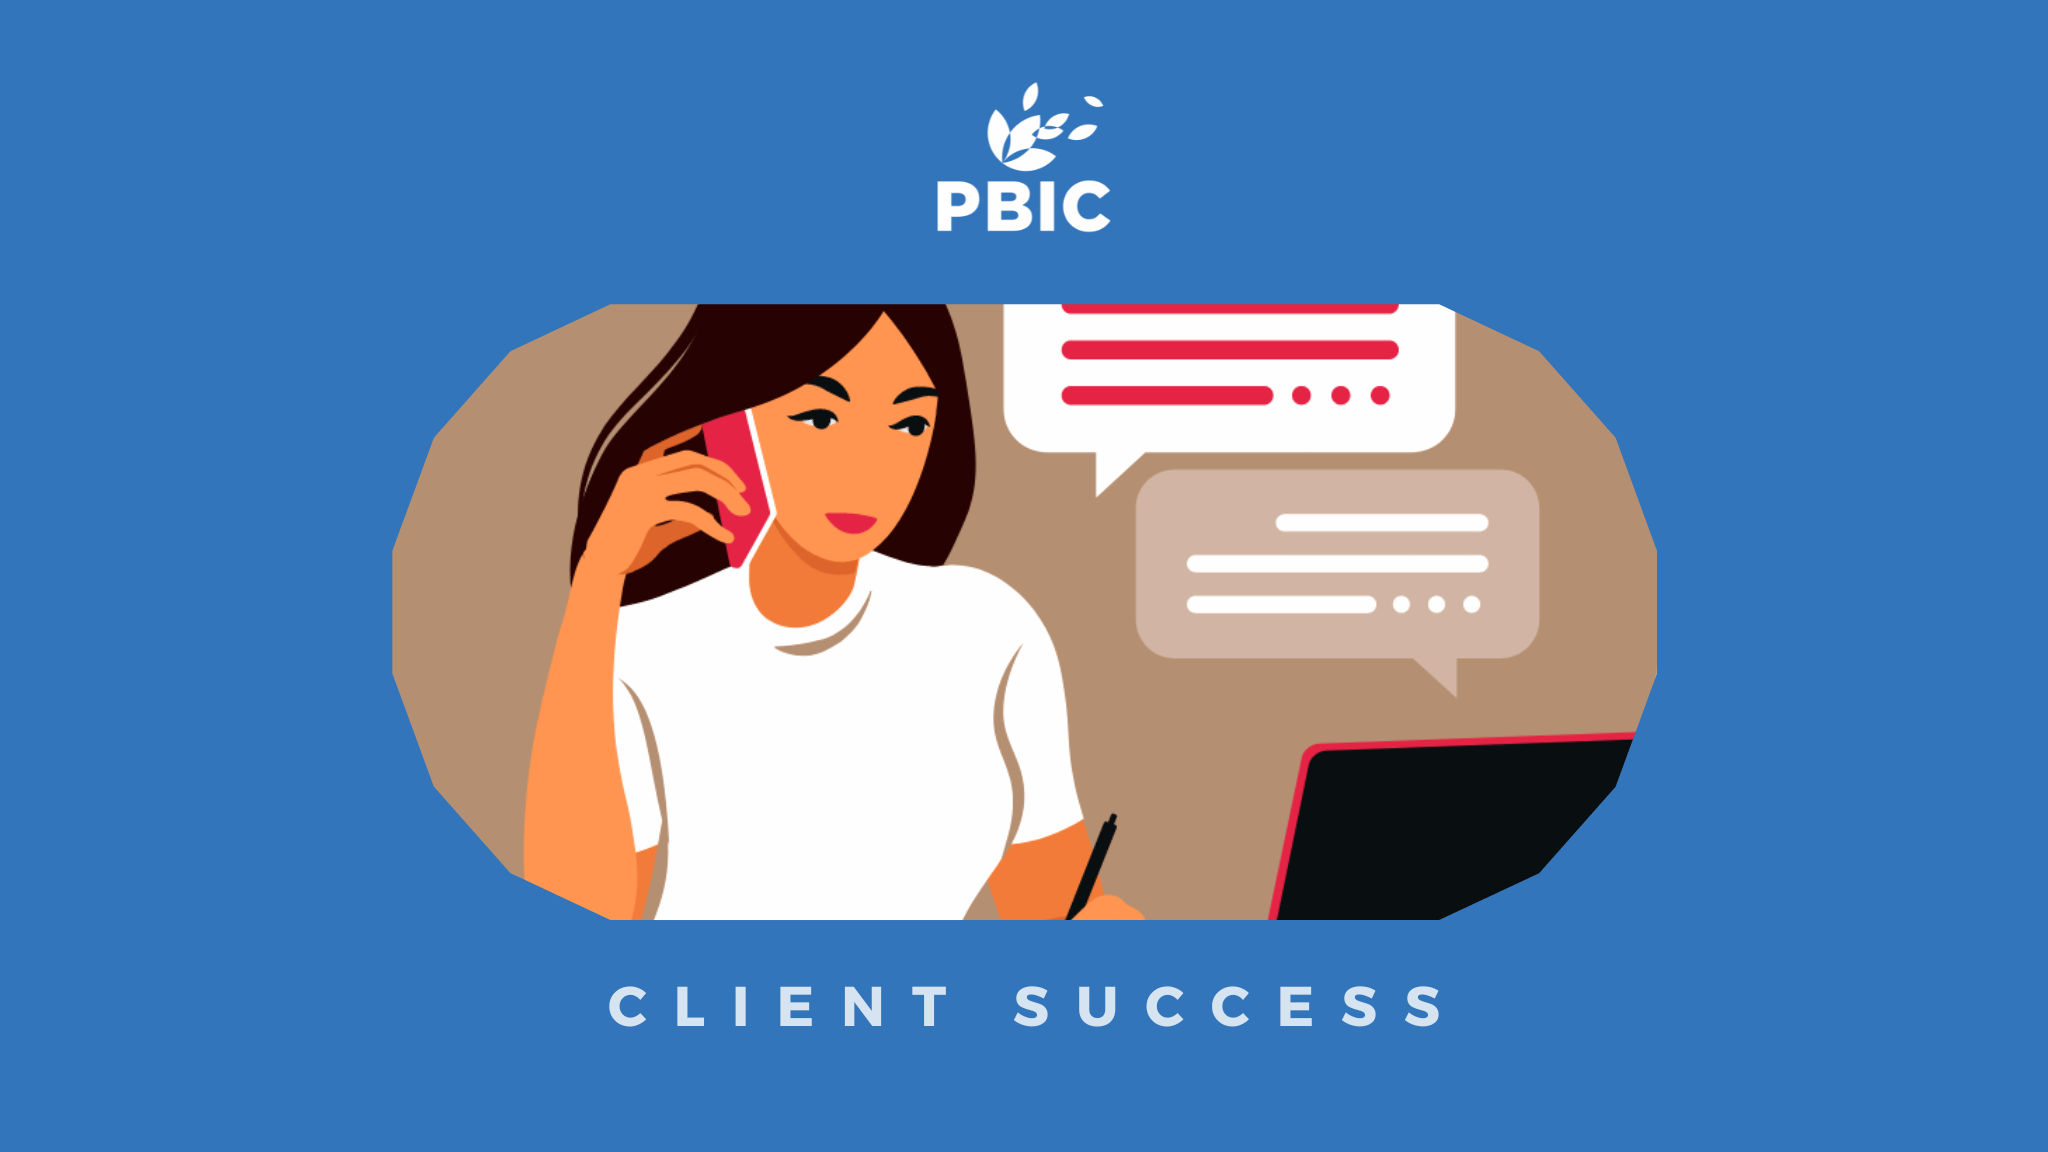 Client success: How PBIC helped a struggling mother with financial issues